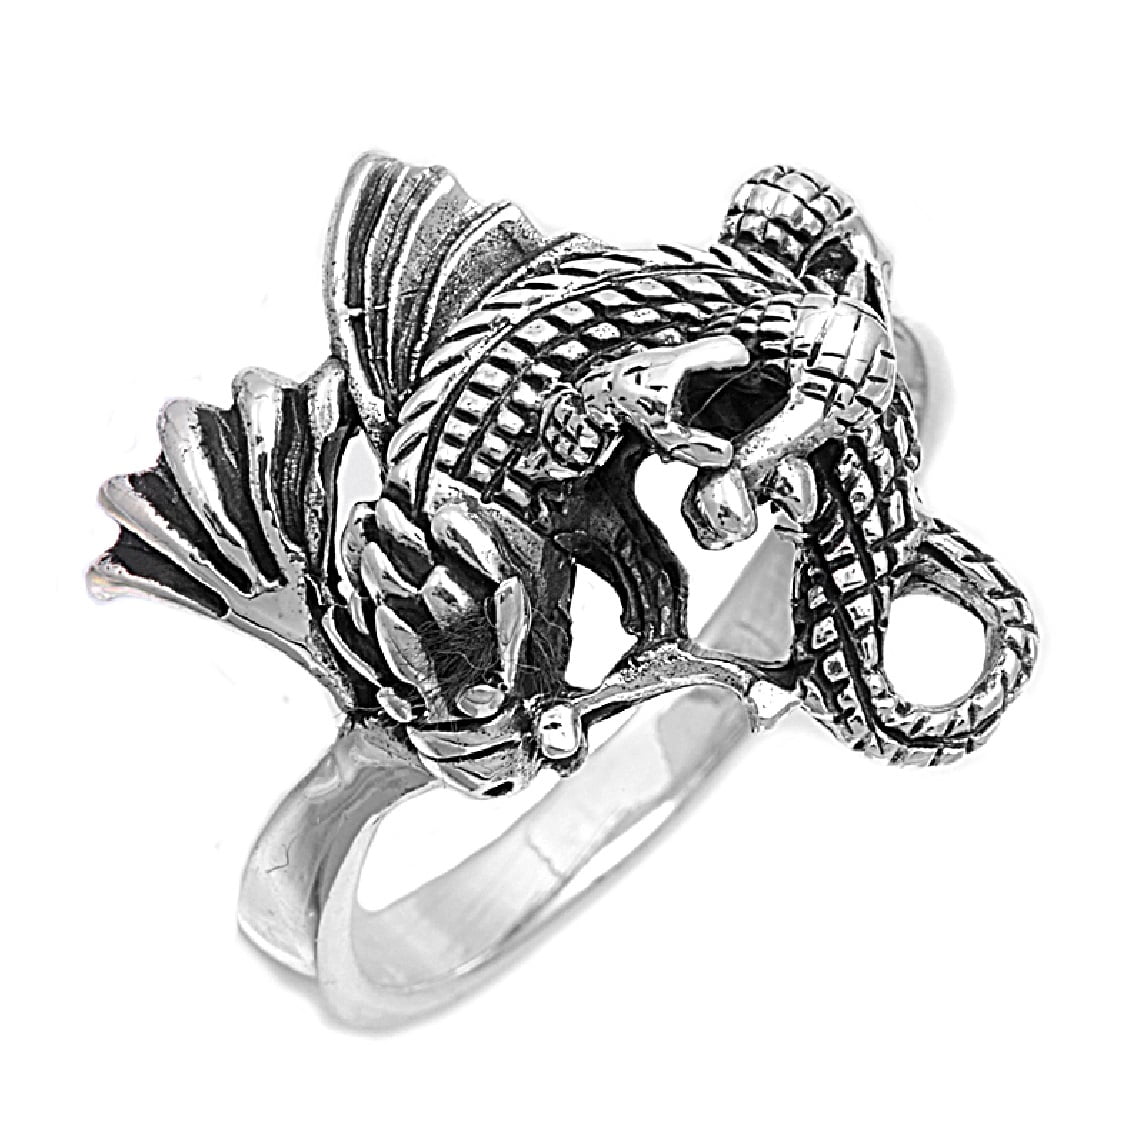 Draconic Lord Dragon Ring - Large Gothic Stainless Steel Ring For Men –  Wicked Tender